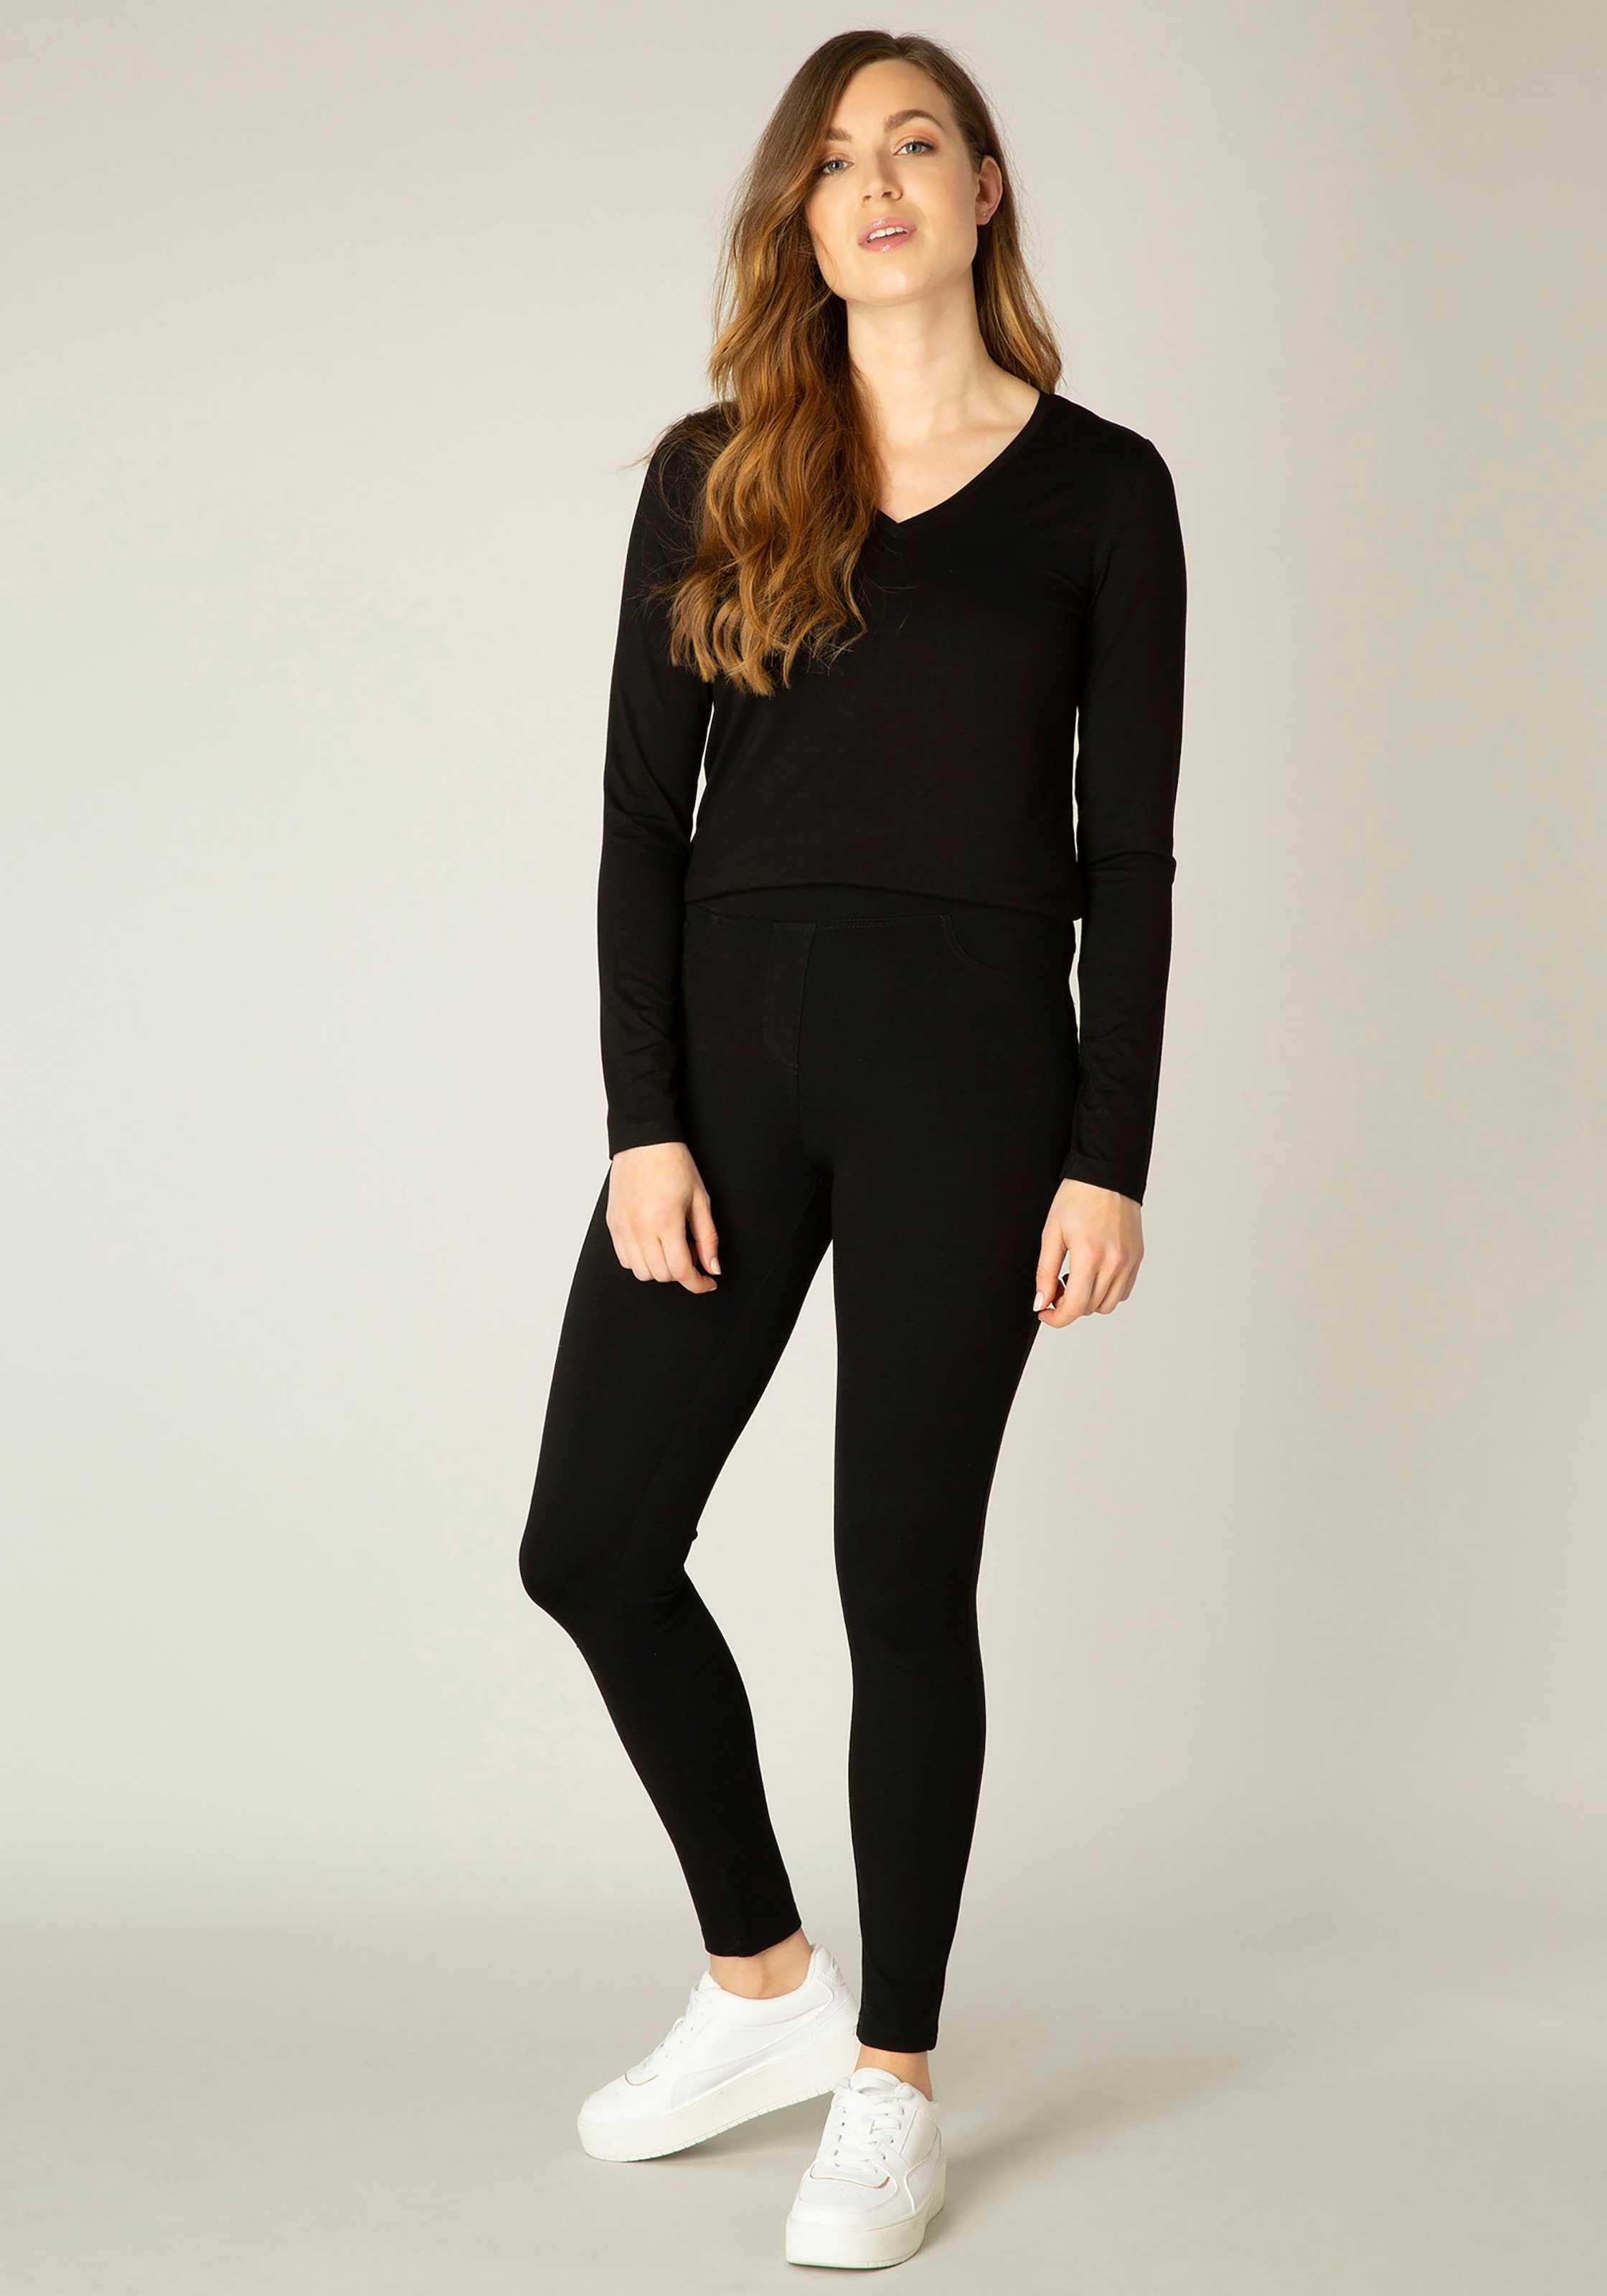 ♕ bei Level Material Bequemes Base Skinny-Fit-Optik in Jeggings »Ornika«,